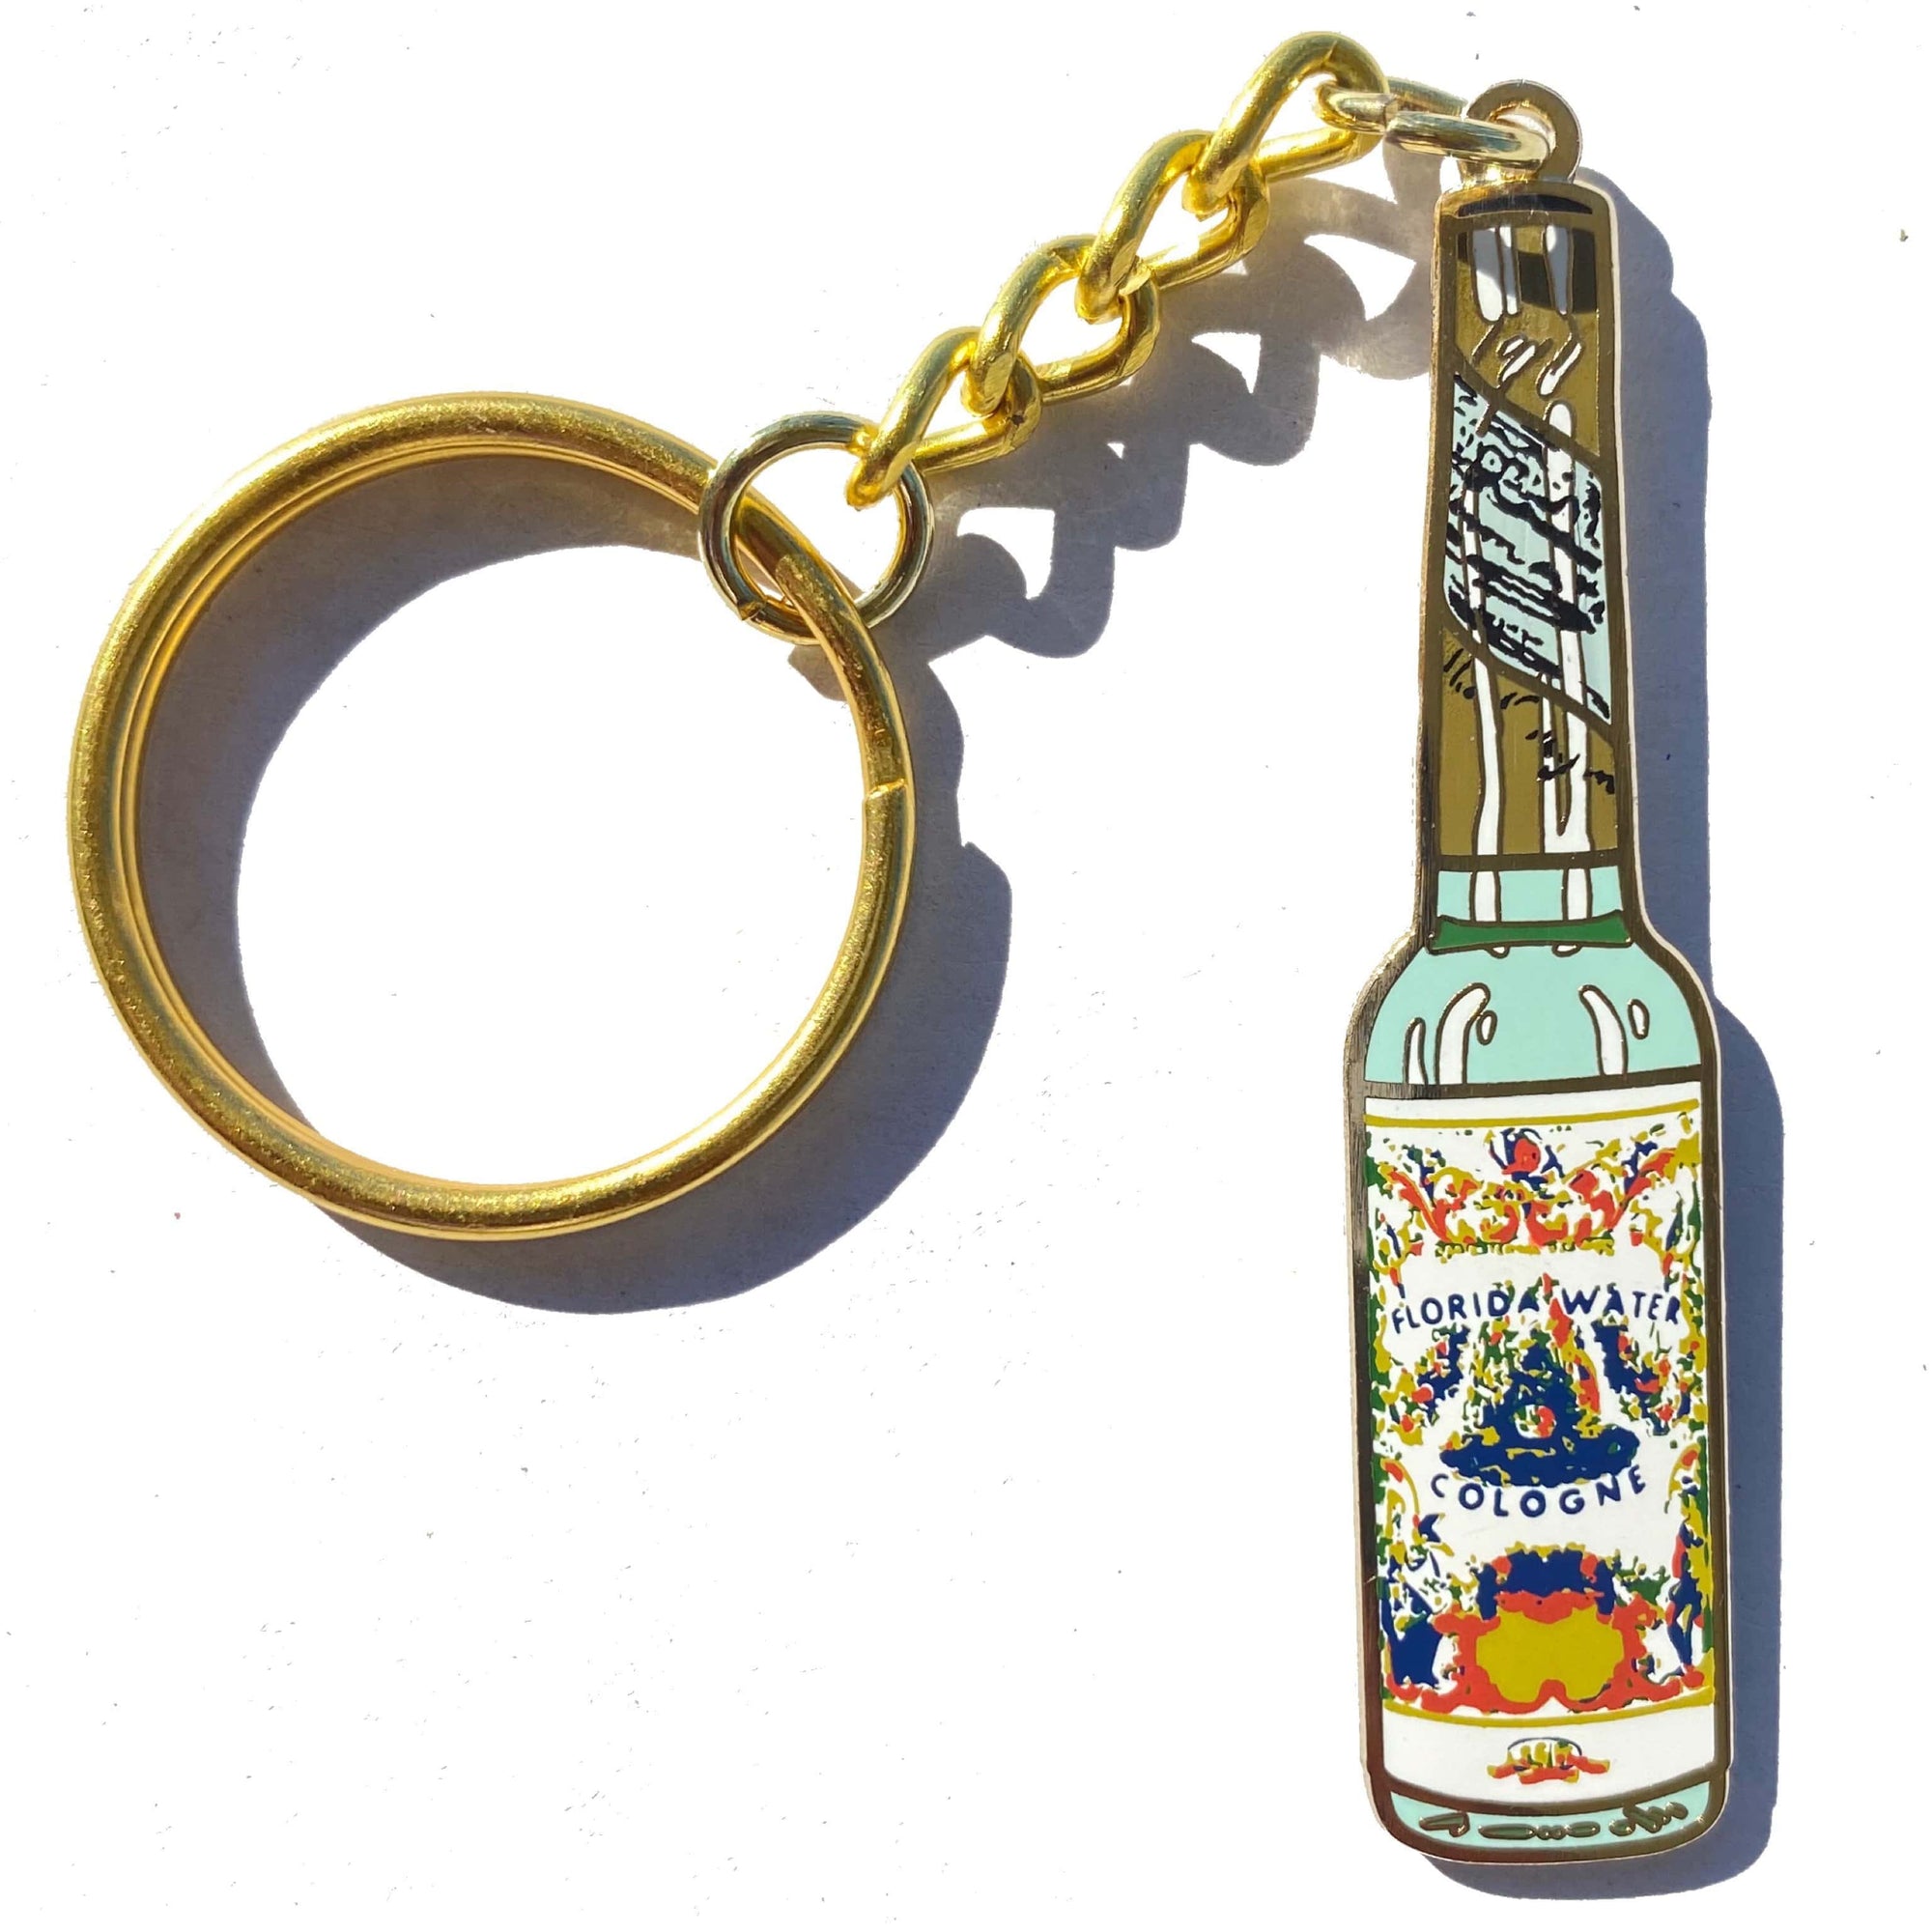 Florida Water Cologne Keychain